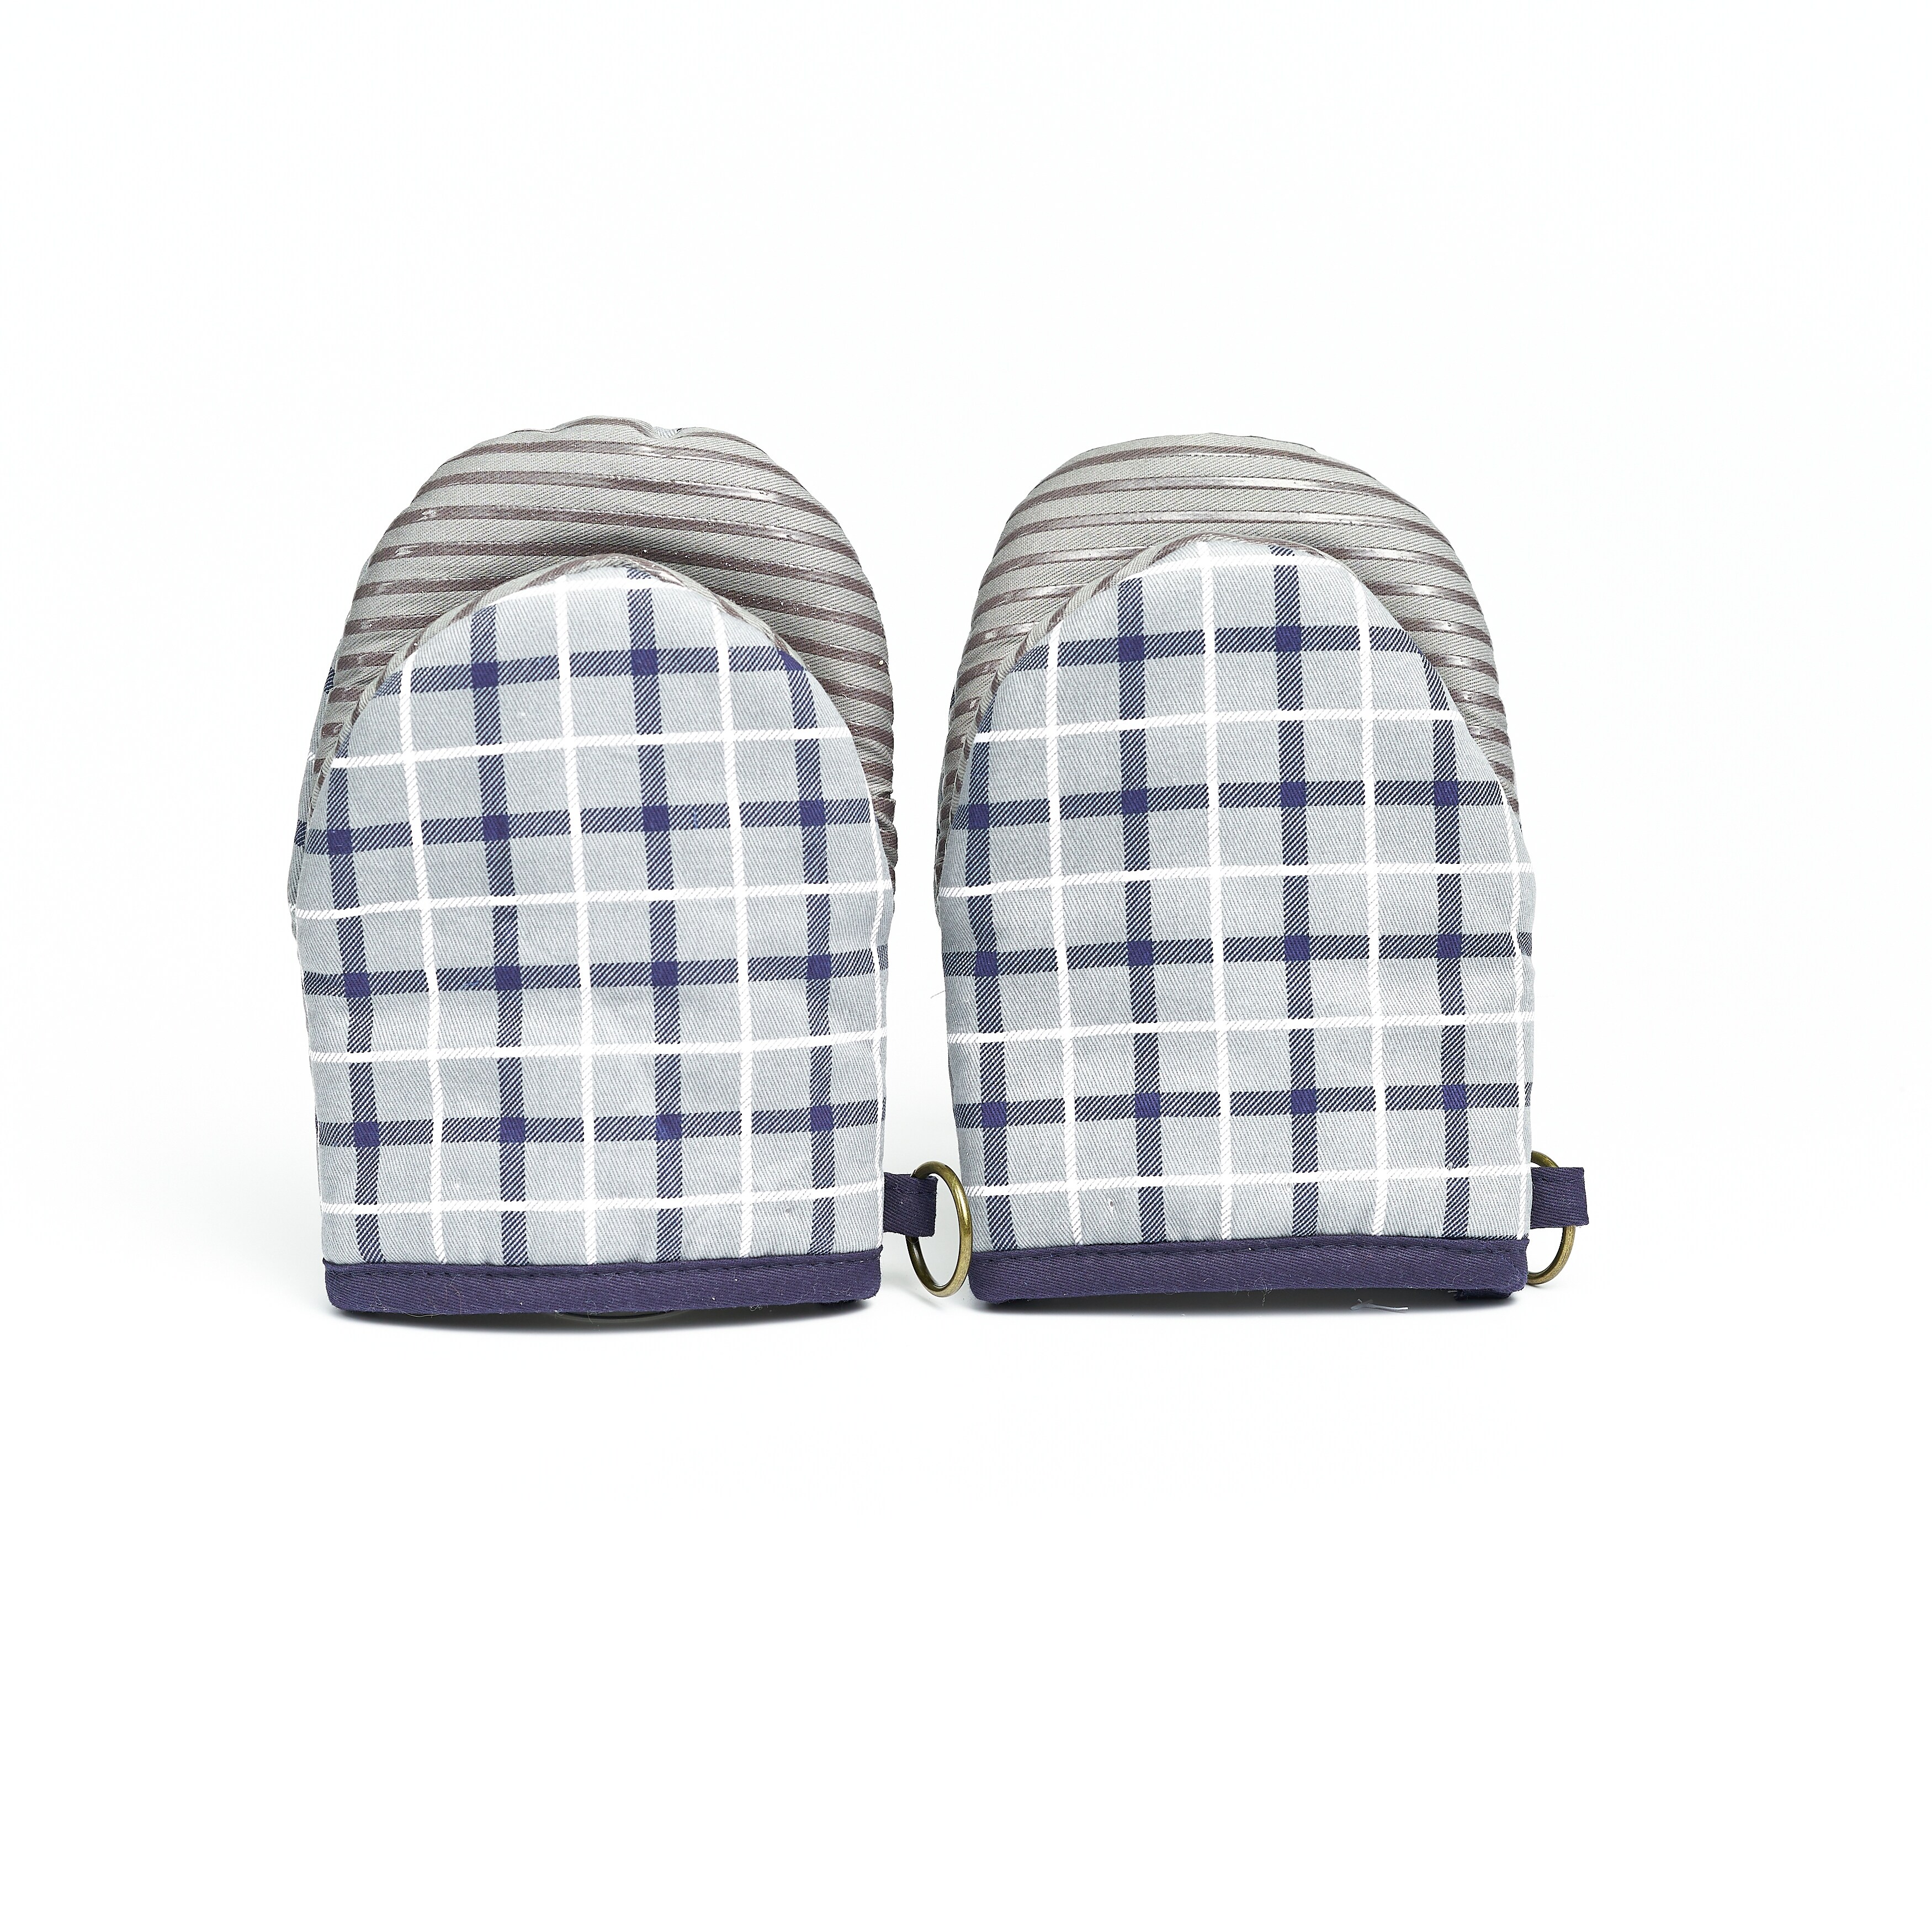 https://ak1.ostkcdn.com/images/products/is/images/direct/75fb39aaa281cdc8160d00f500510dfe2e3ca313/Nautica-Home-Grey-Navy-Plaid-100%25-Cotton-Mini-Oven-Mitt-With-Silicone-Palm-%28Set-of-2%29.jpg